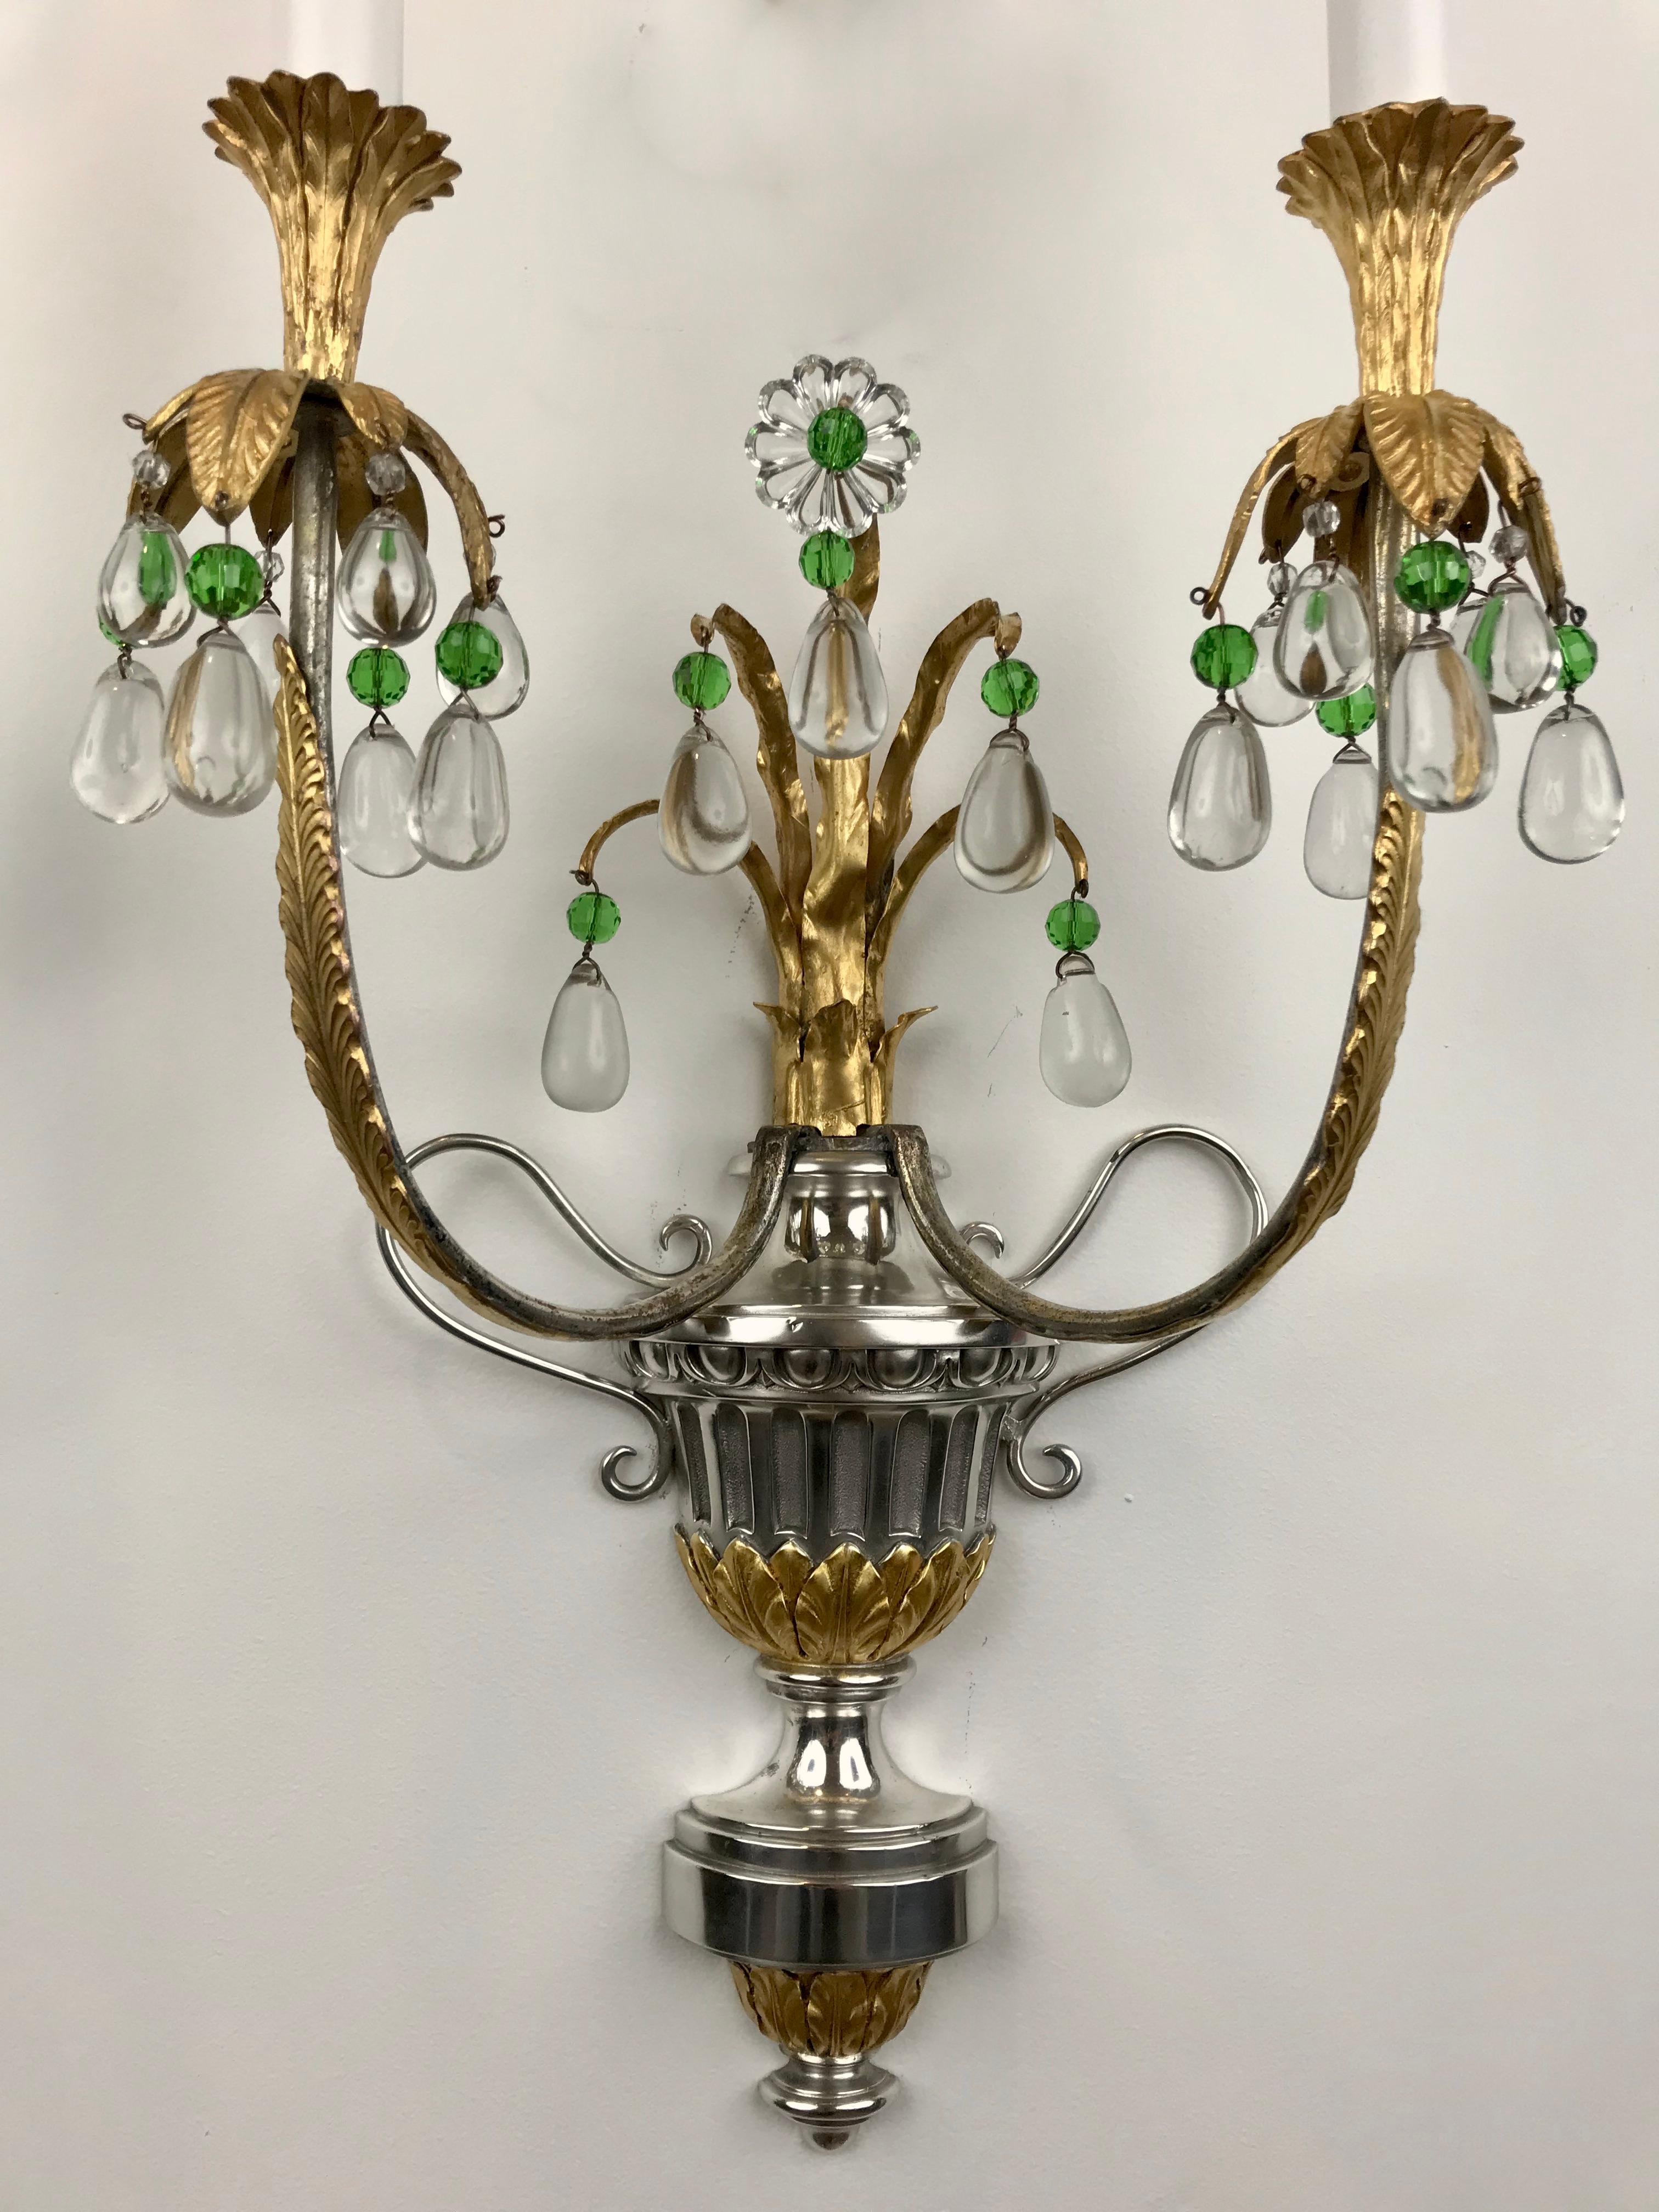  Four Silver and Gilt Bronze Sconces with Green Crystal Accents by Caldwell For Sale 5